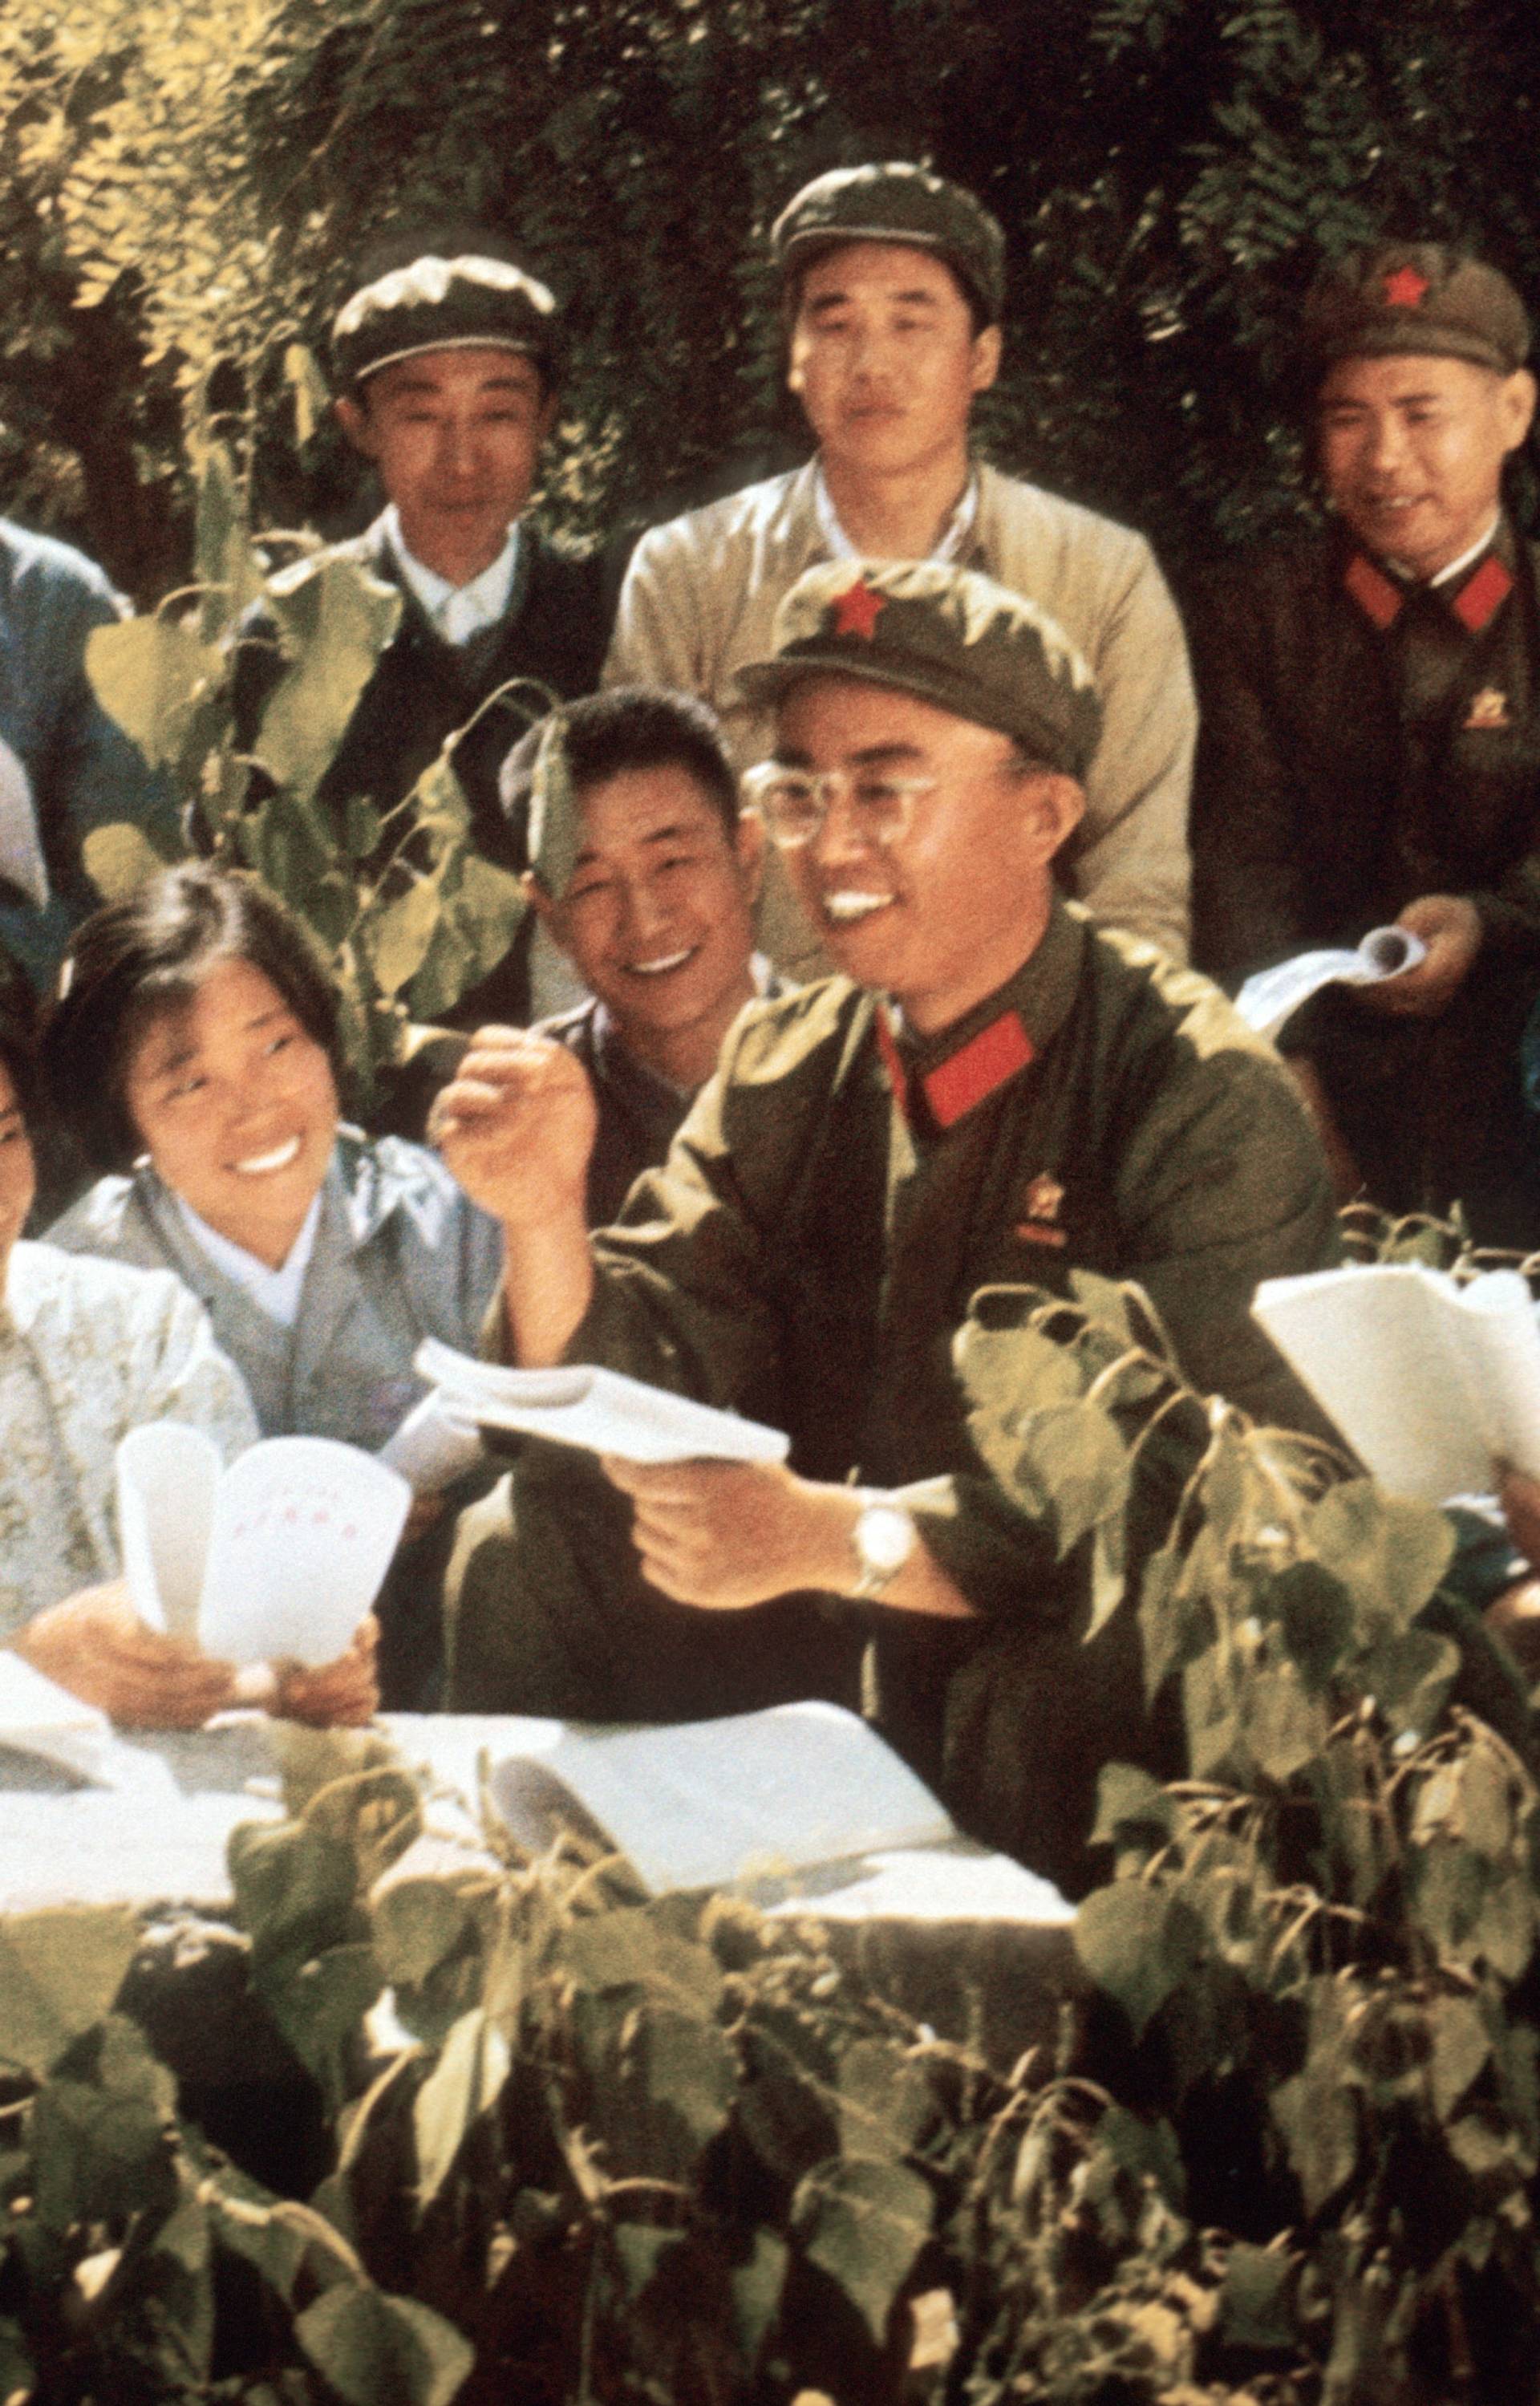 Chinese youth study with Red Guard members Mao Zedong's 'Little Red Book' somewhere in China in a picture released in 1971